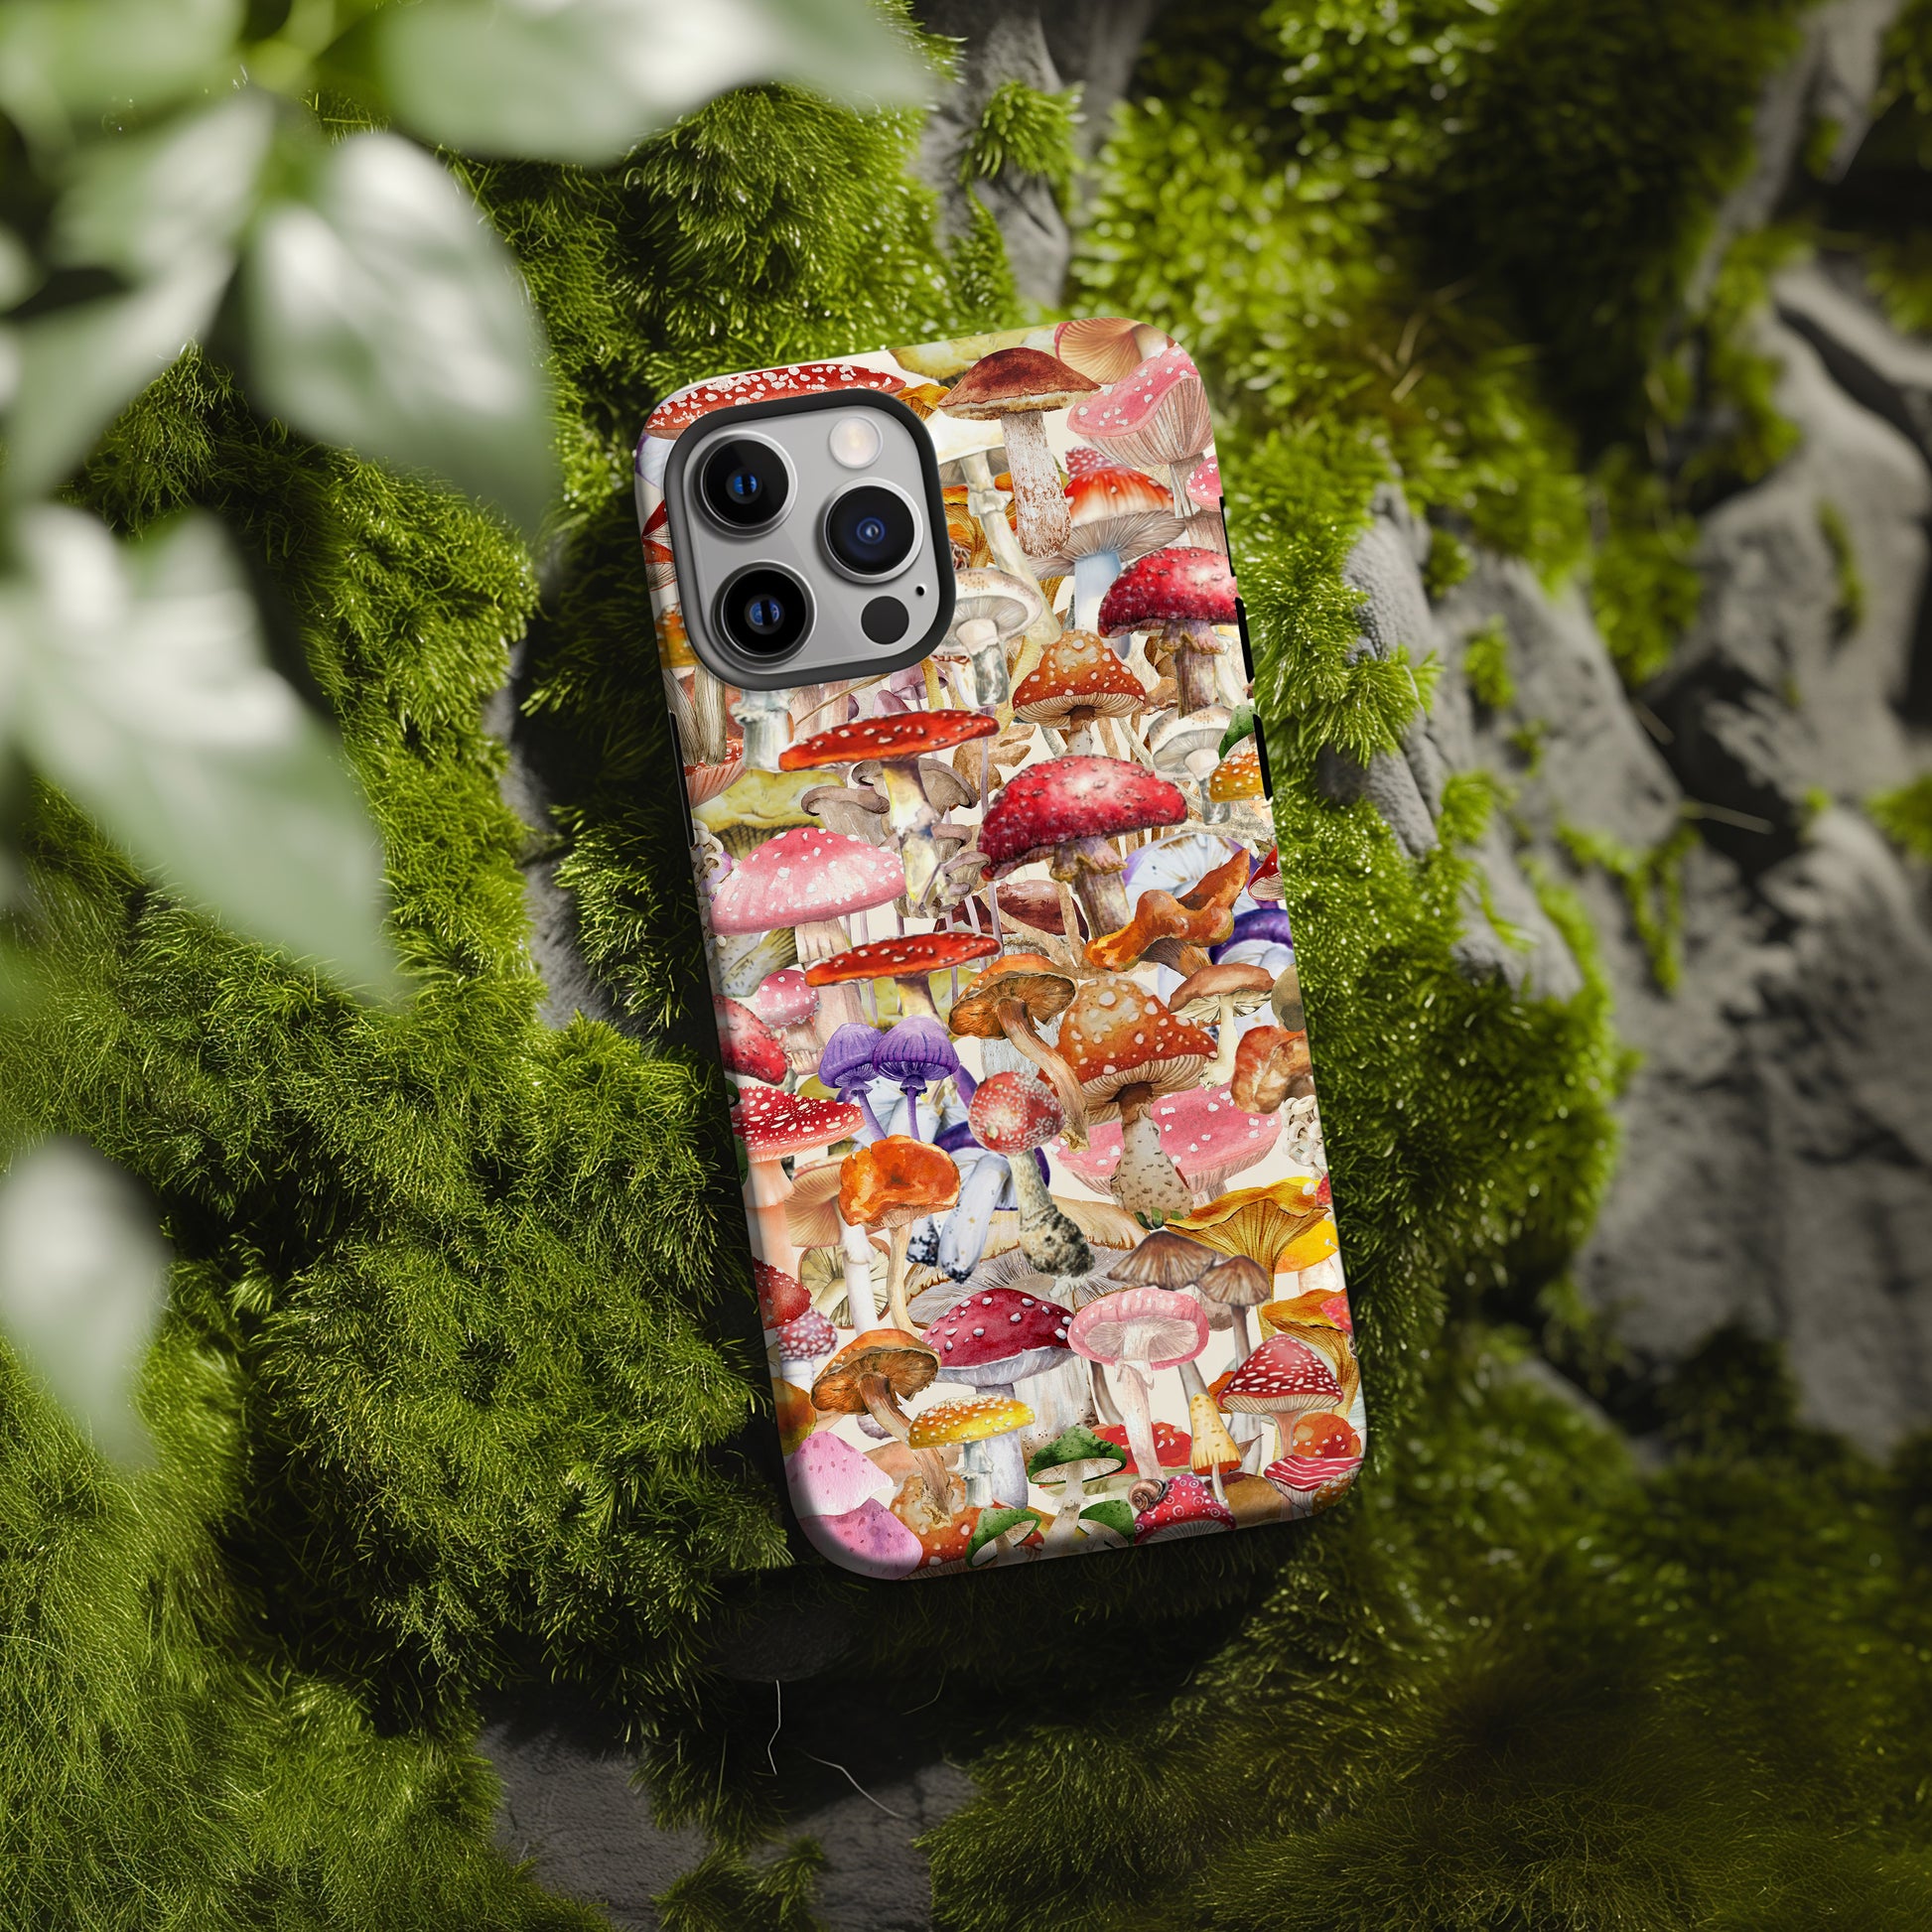 moss rock with Magic Mushroom Cottagecore style collage phone case by Artscape Market